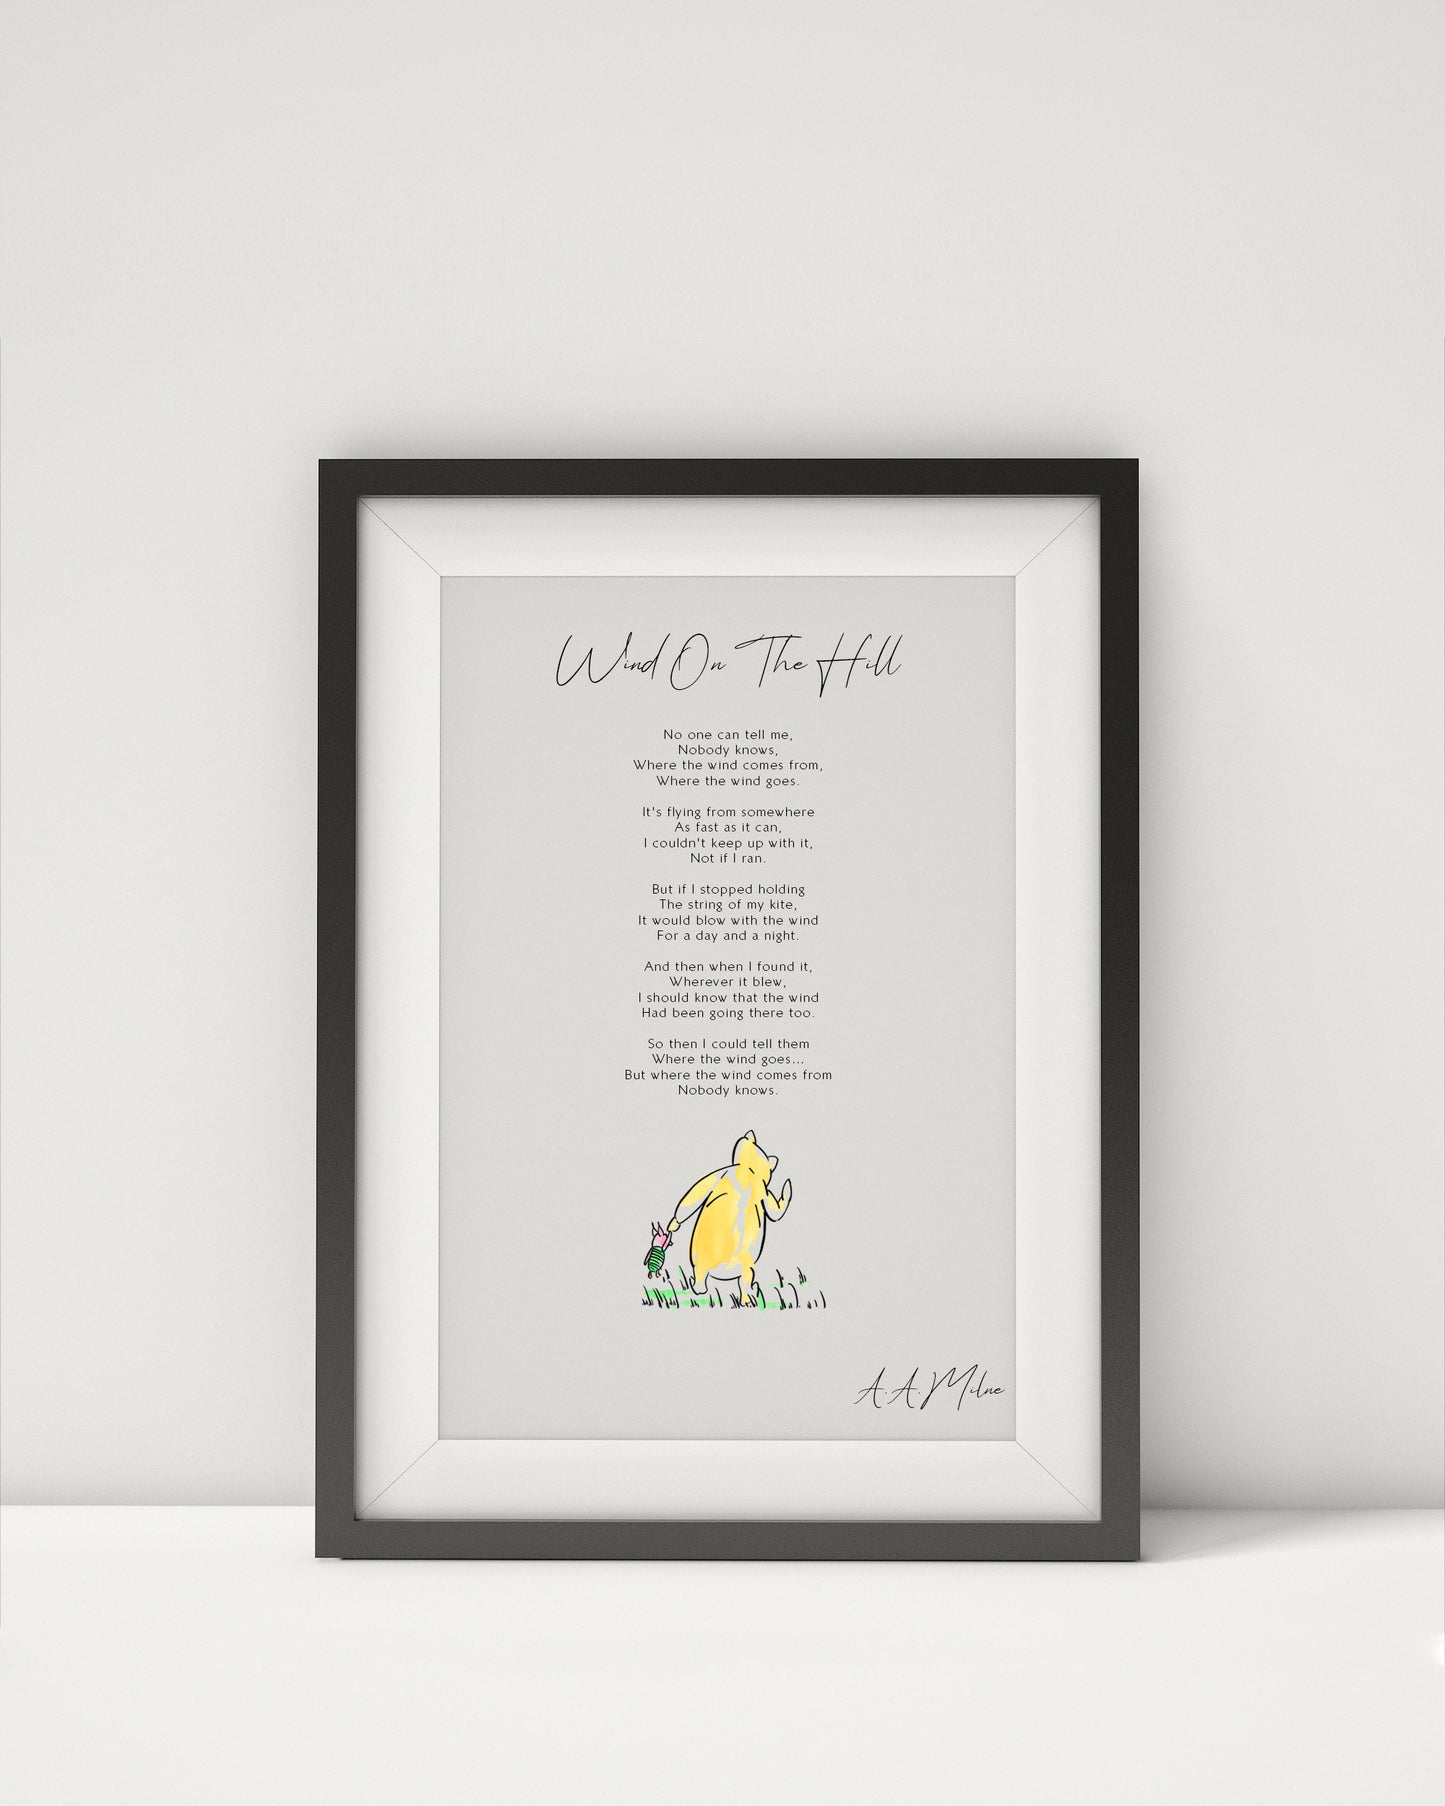 Wind on the hill by AA Milne Print - Winnie the Pooh Nursery Print Framed New Baby Gift, Gender Neutral Baby Gift - Winnie the Pooh Poem